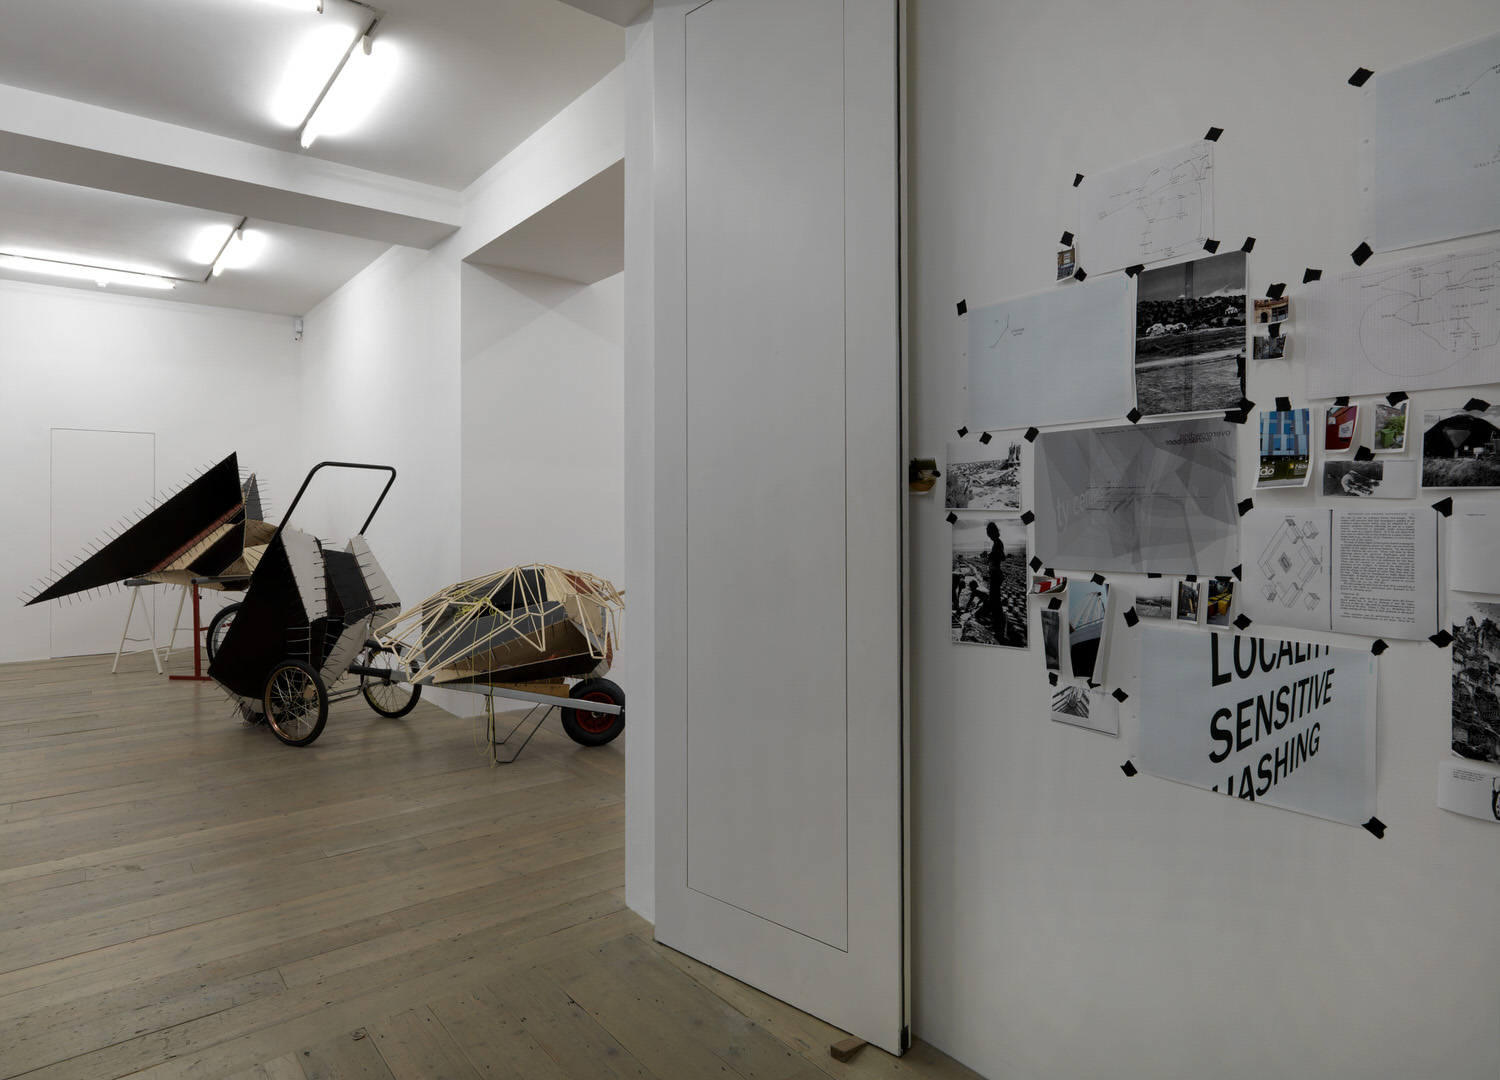 Installation view with research wall